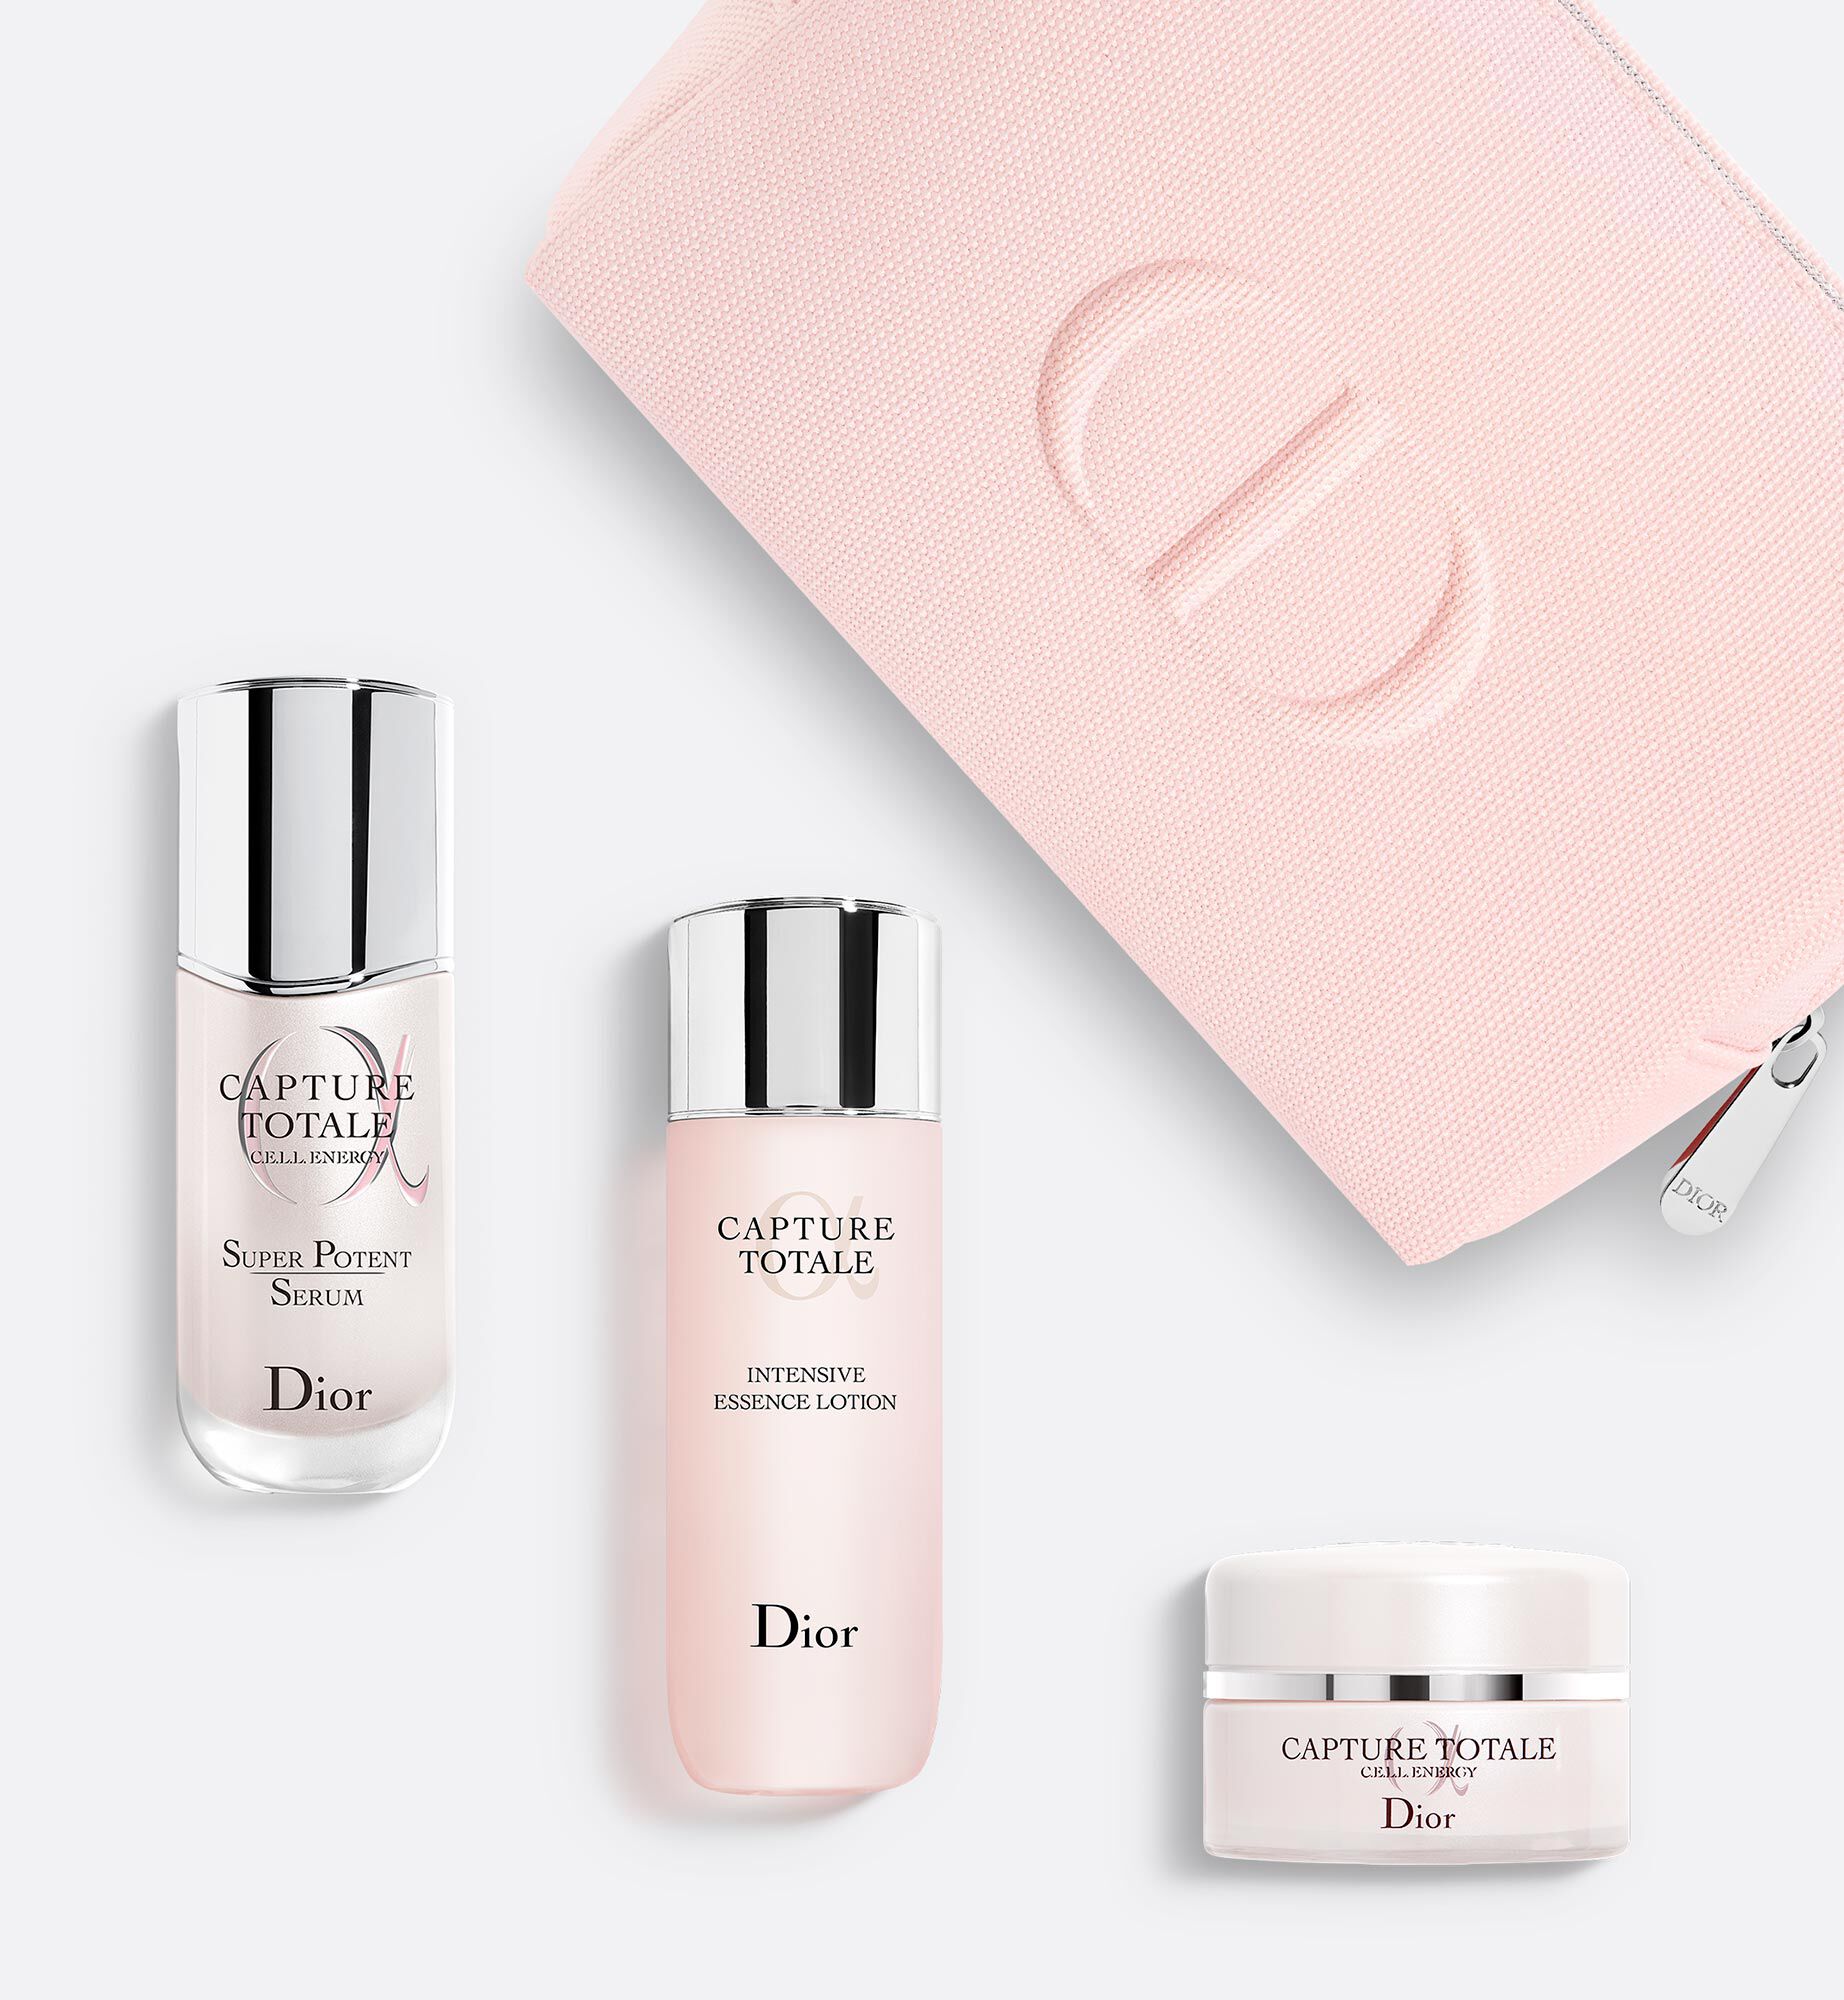 Capture Totale Gift Set 4 antiaging Facial Skincare Products  DIOR